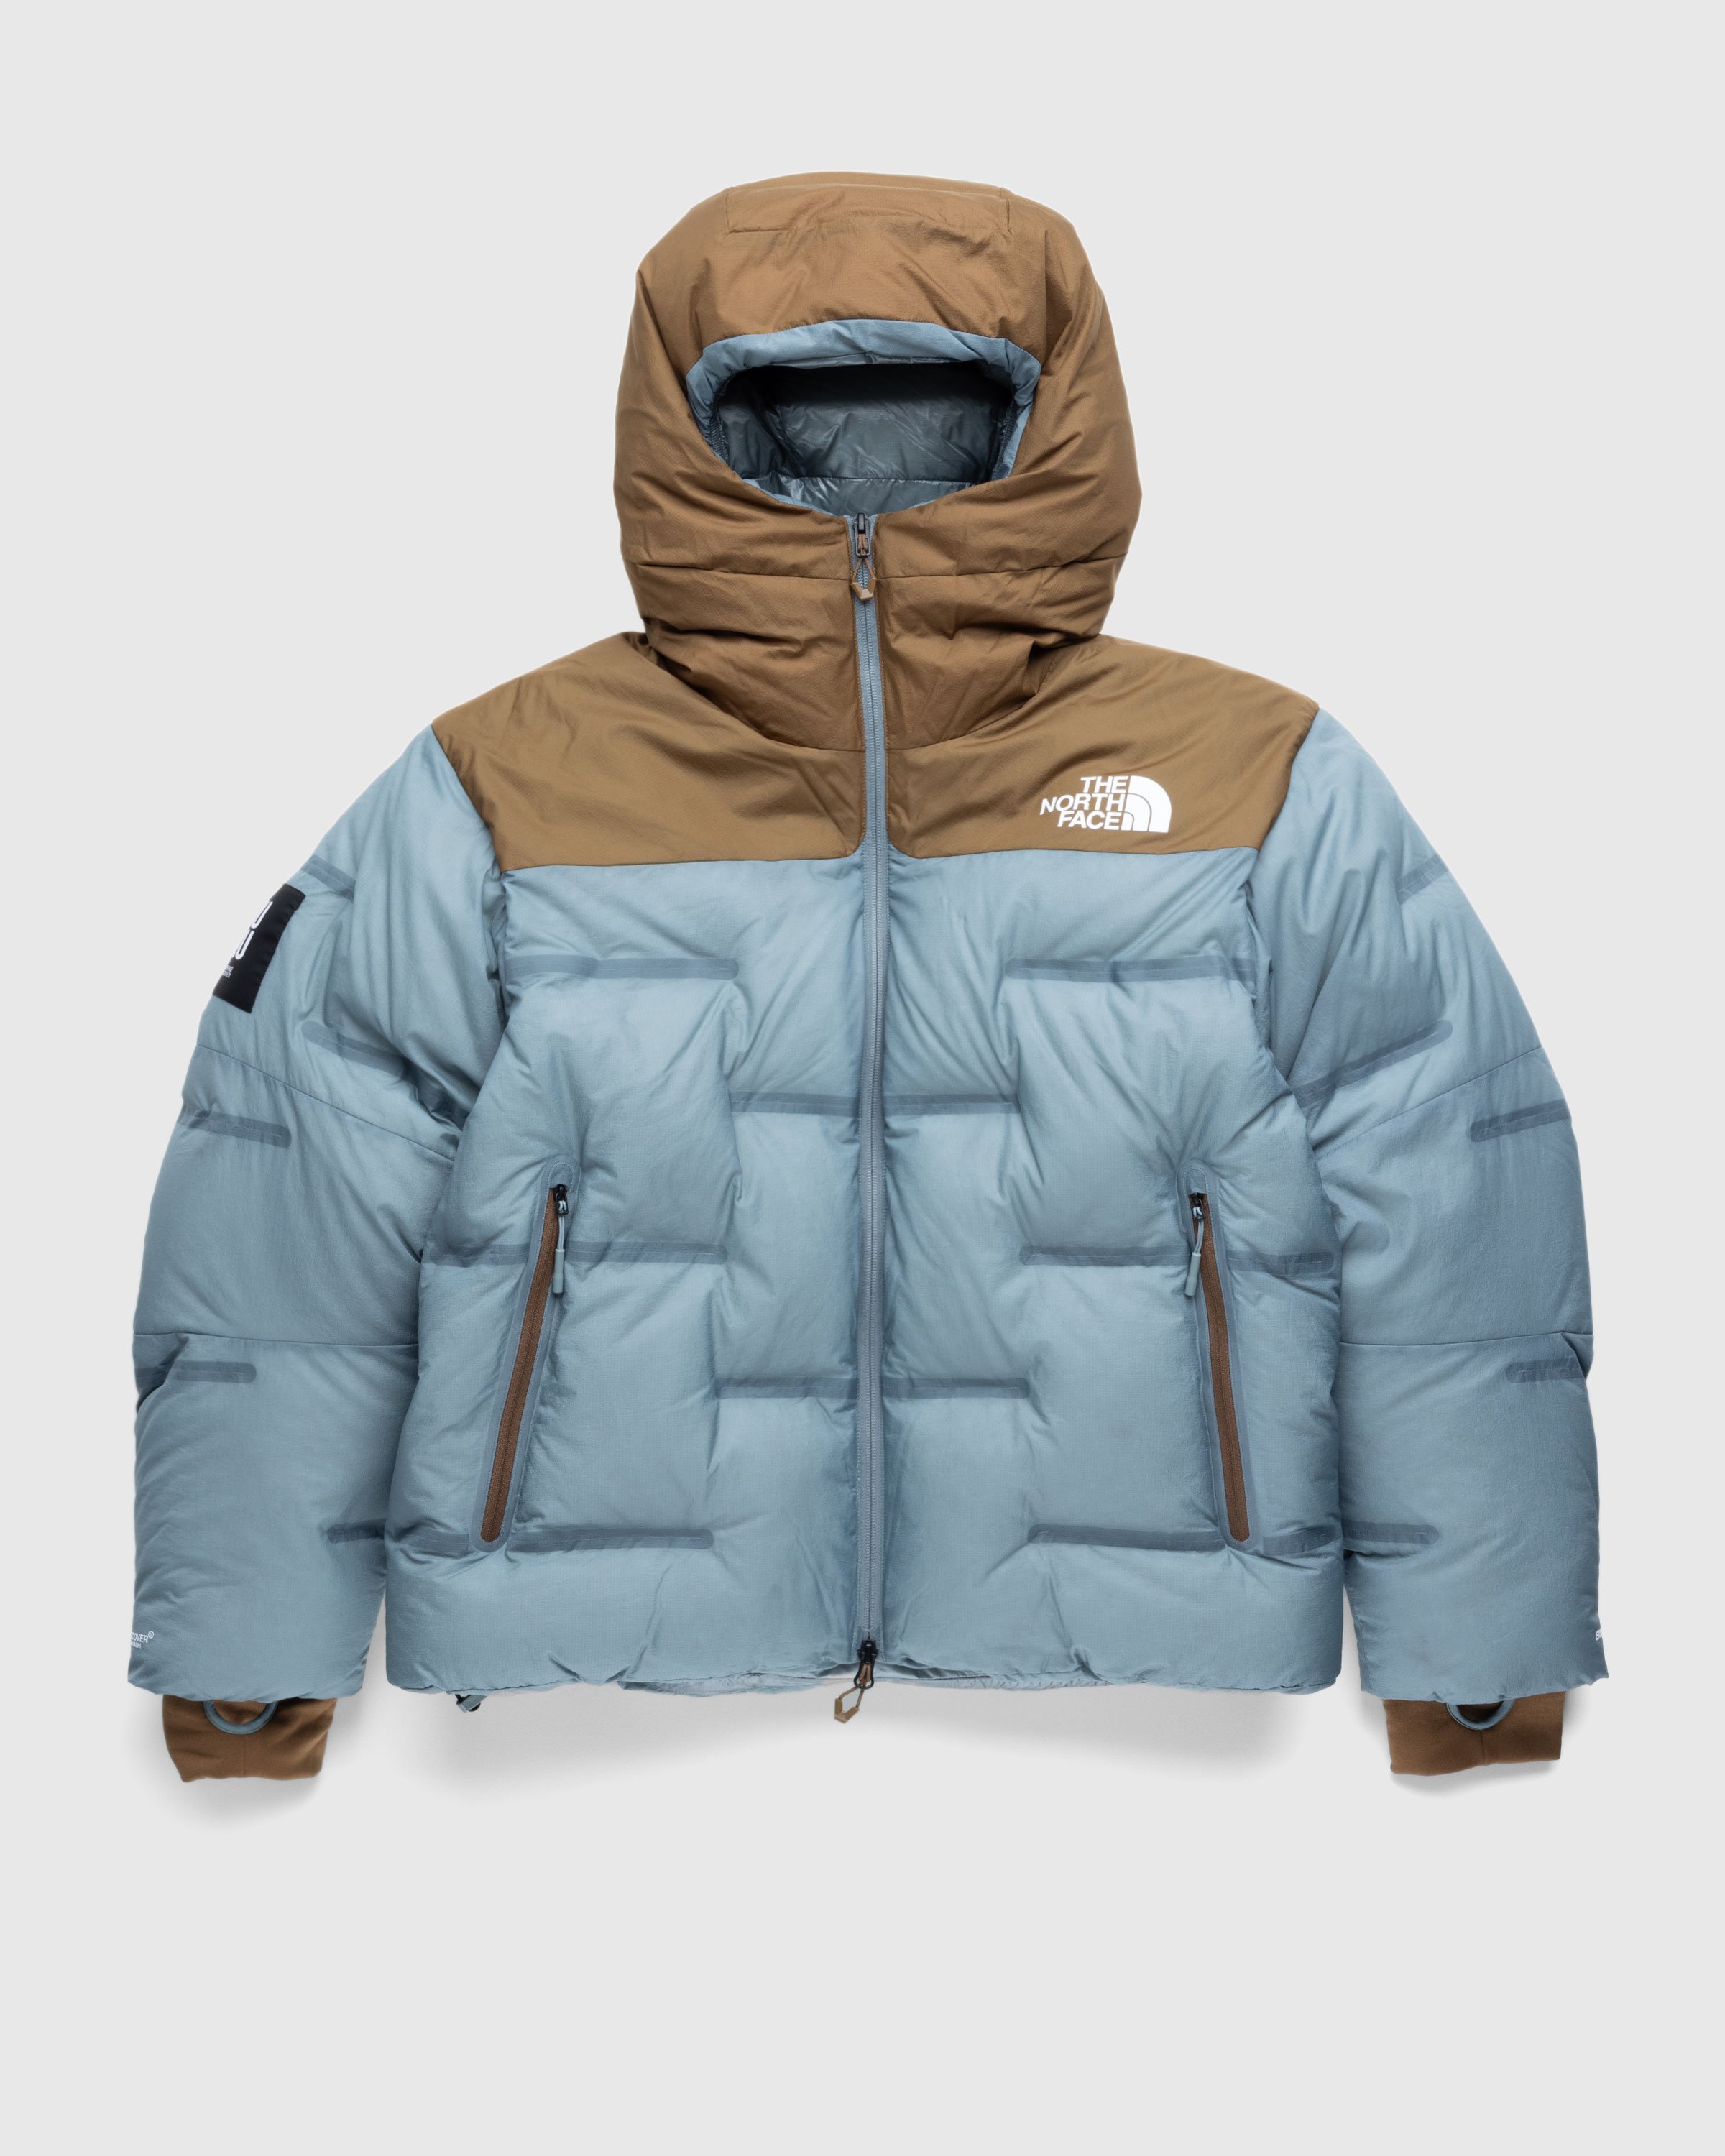 The North Face x UNDERCOVER - Soukuu Cloud Down Nupste Sepia Brown/Concrete Gray - Clothing - Multi - Image 1